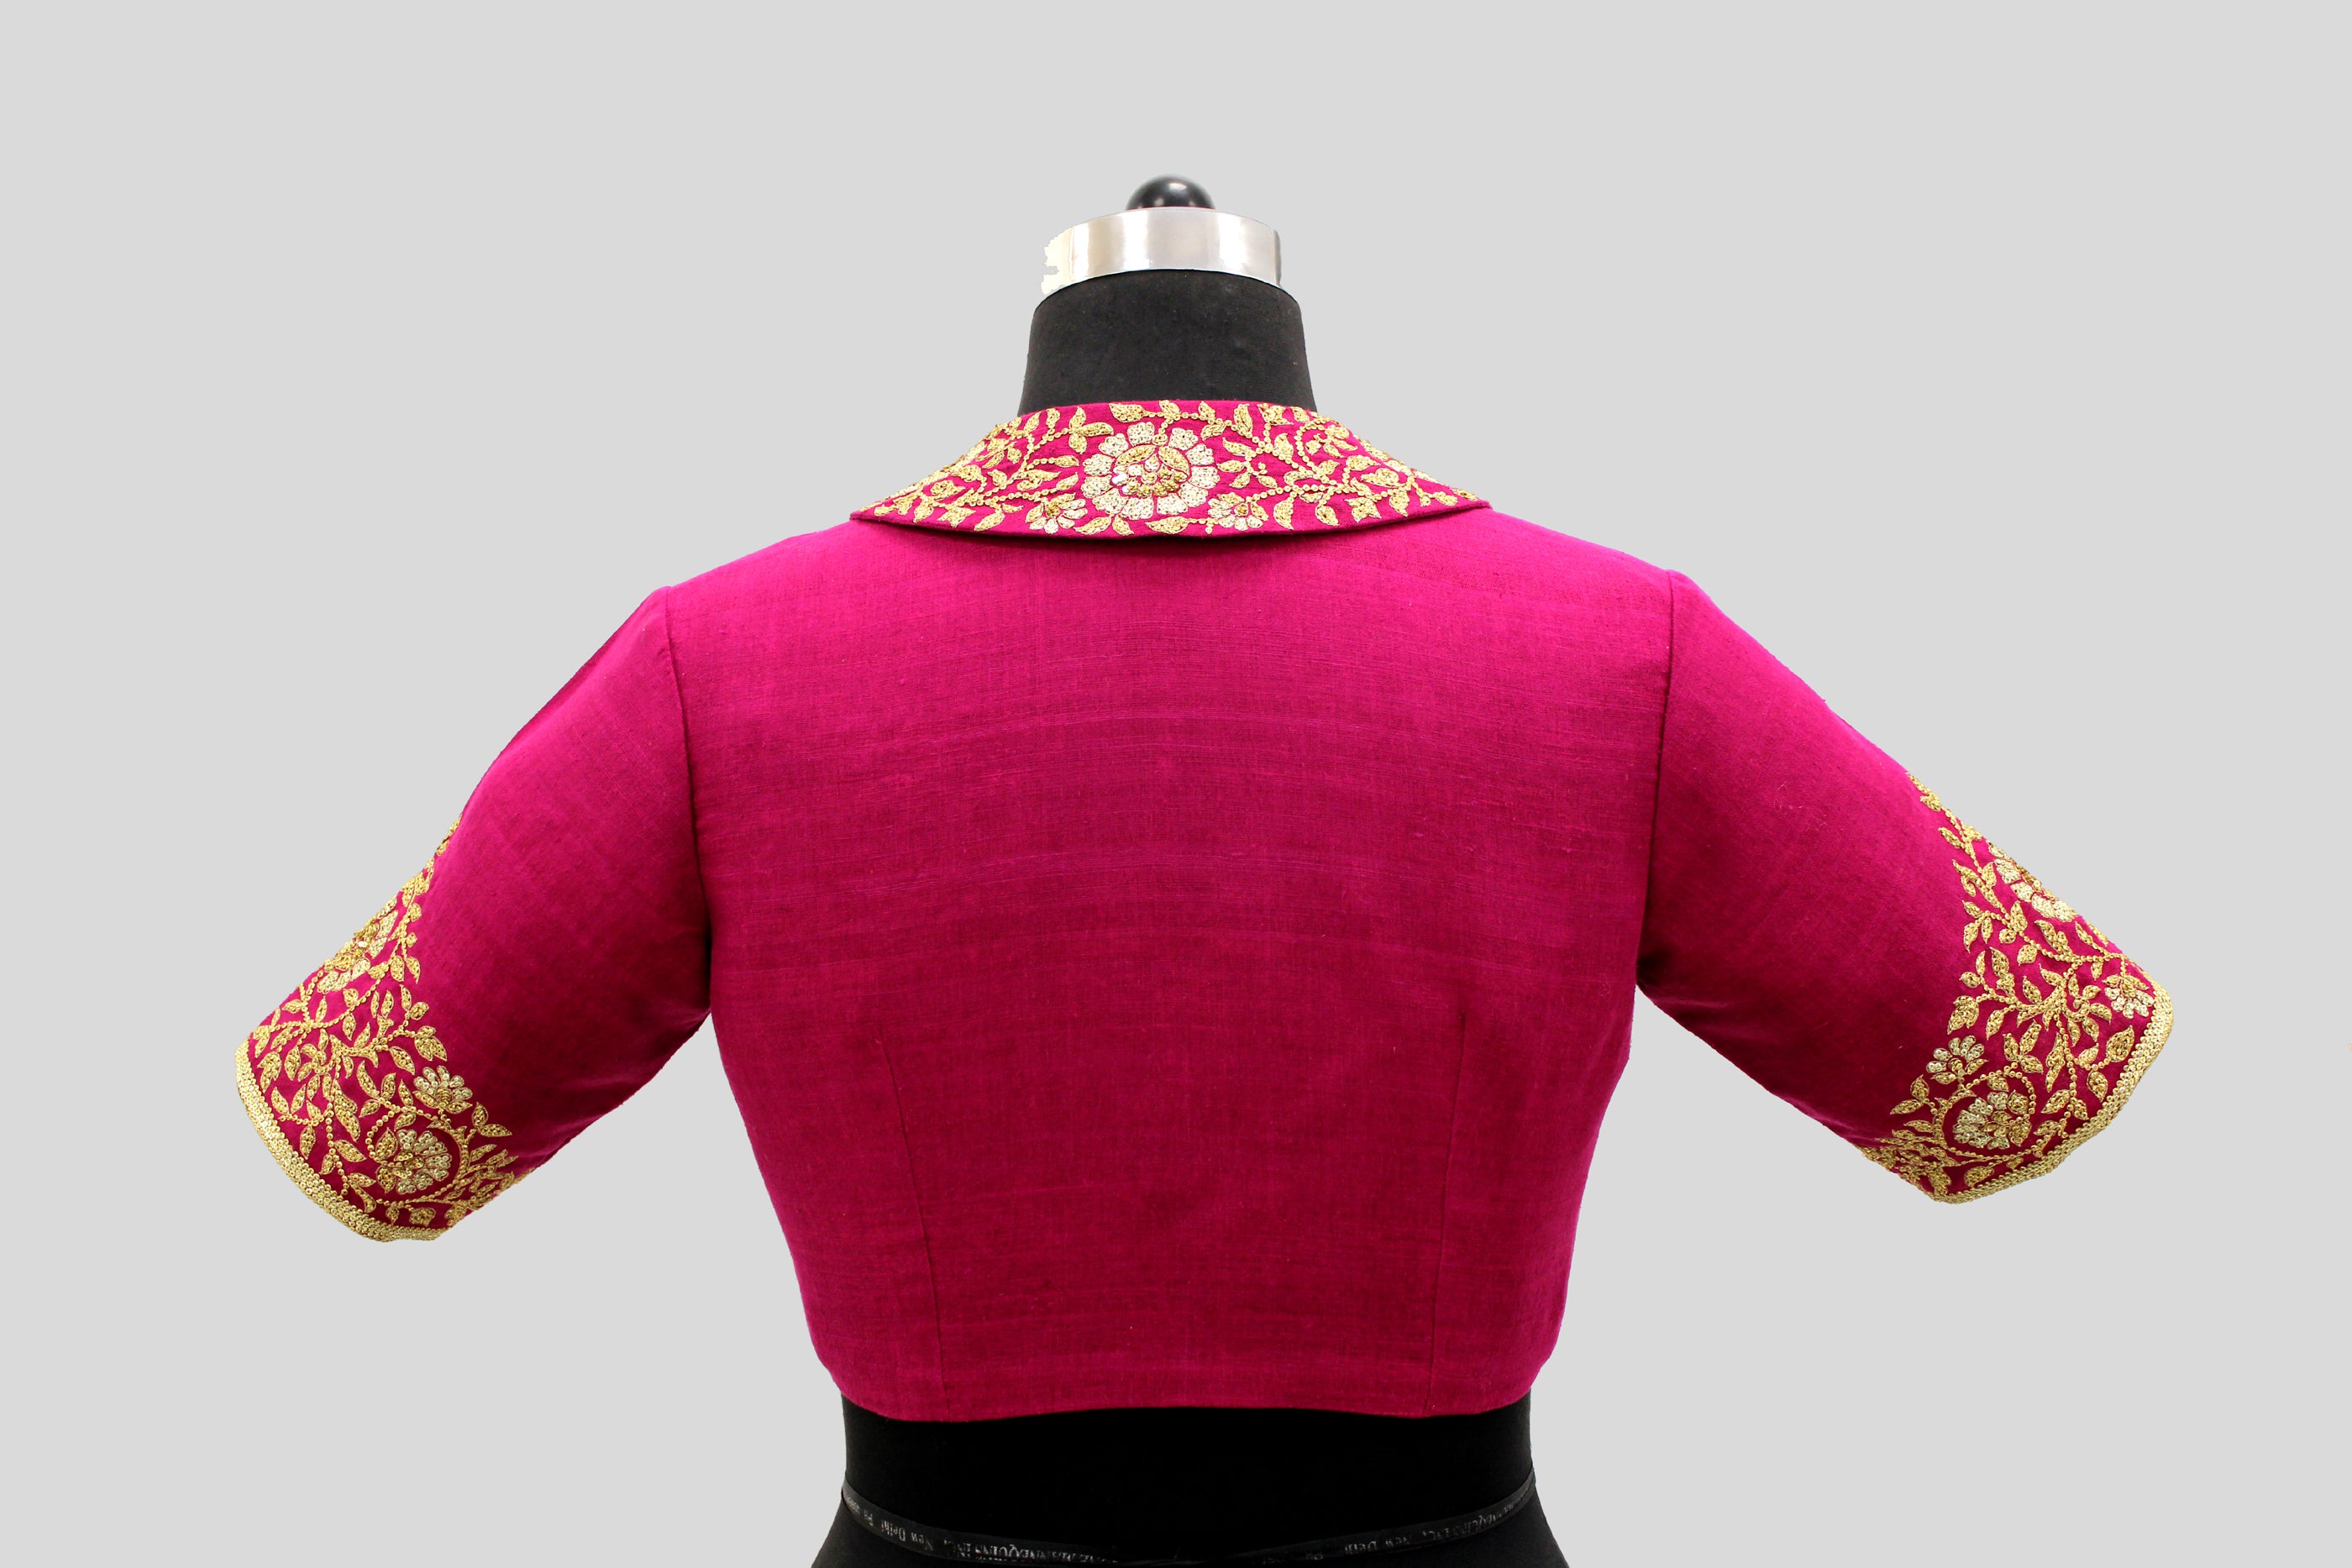 Matka Shawal Collar with Big Mughal Jaal Broder Wine Blouse